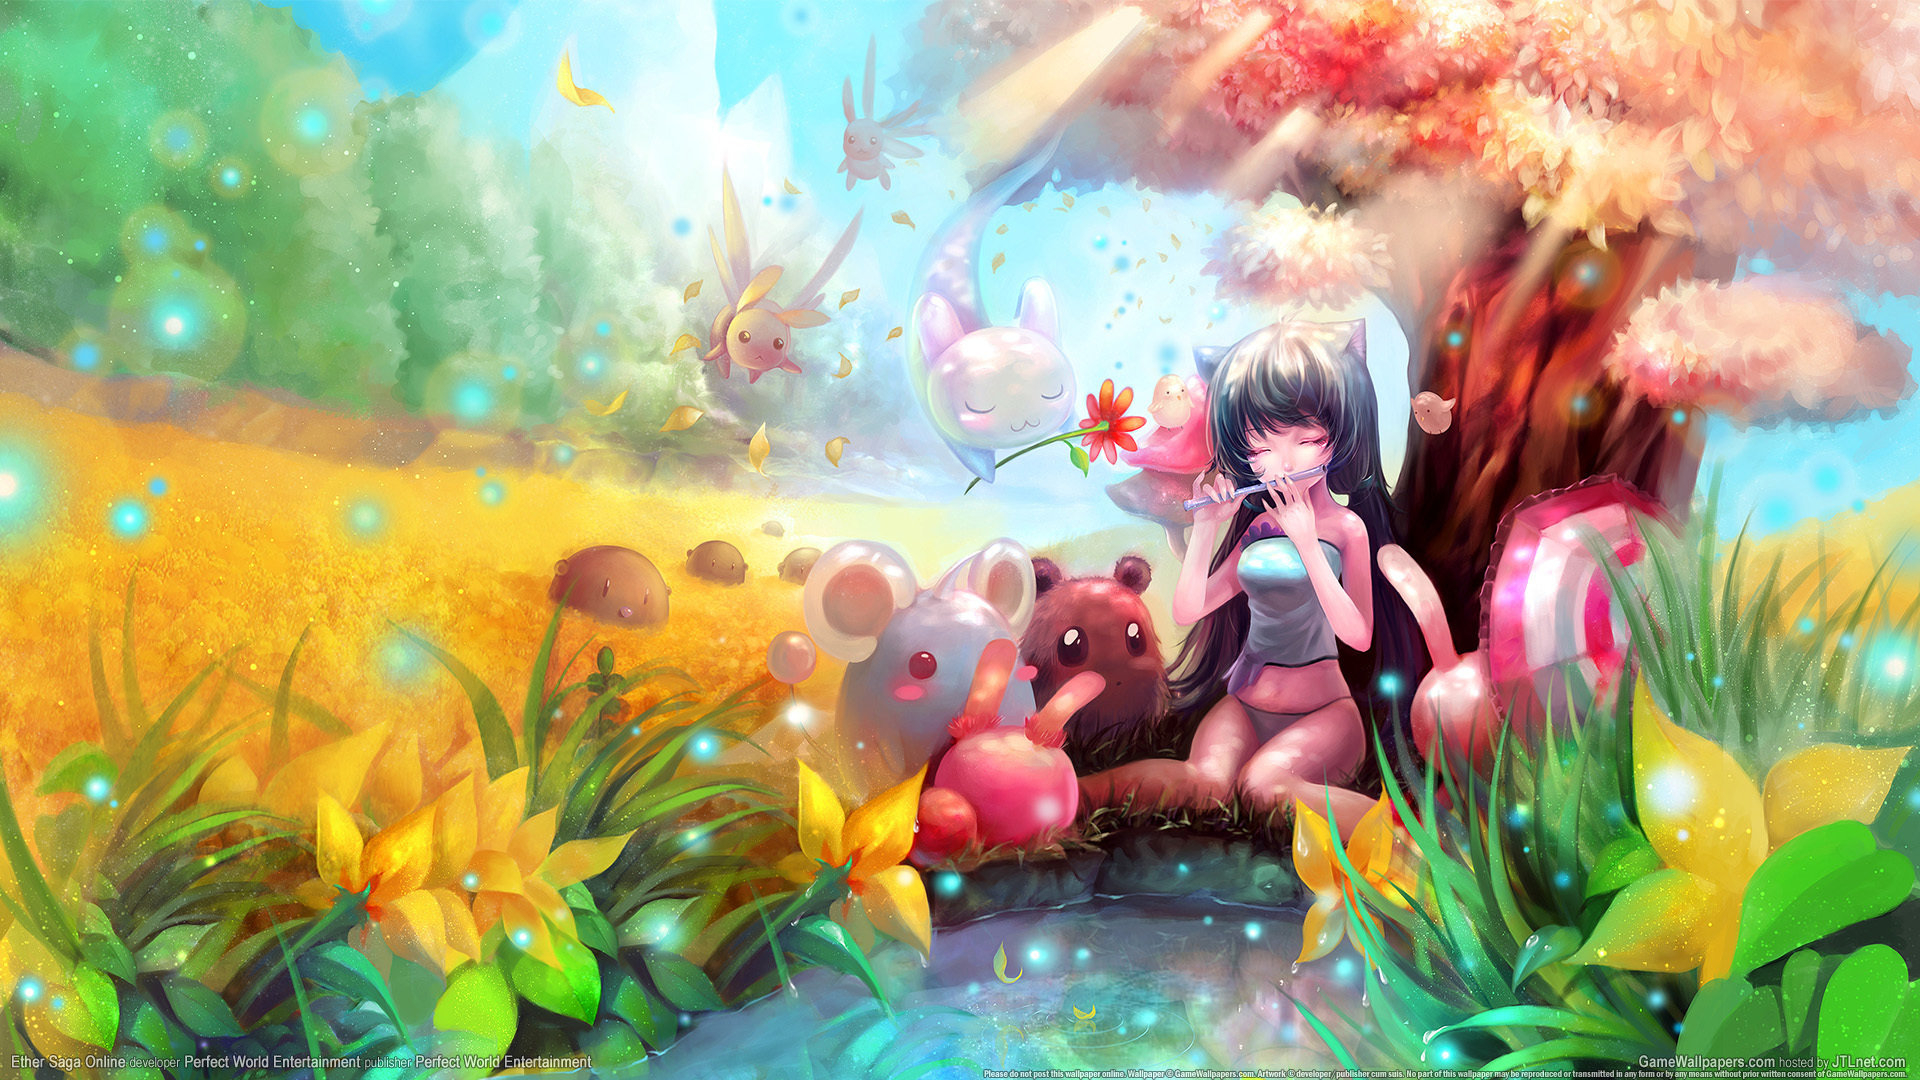 Anime Wallpaper Hd 1080p See To World - Anime Girl With Animals - HD Wallpaper 